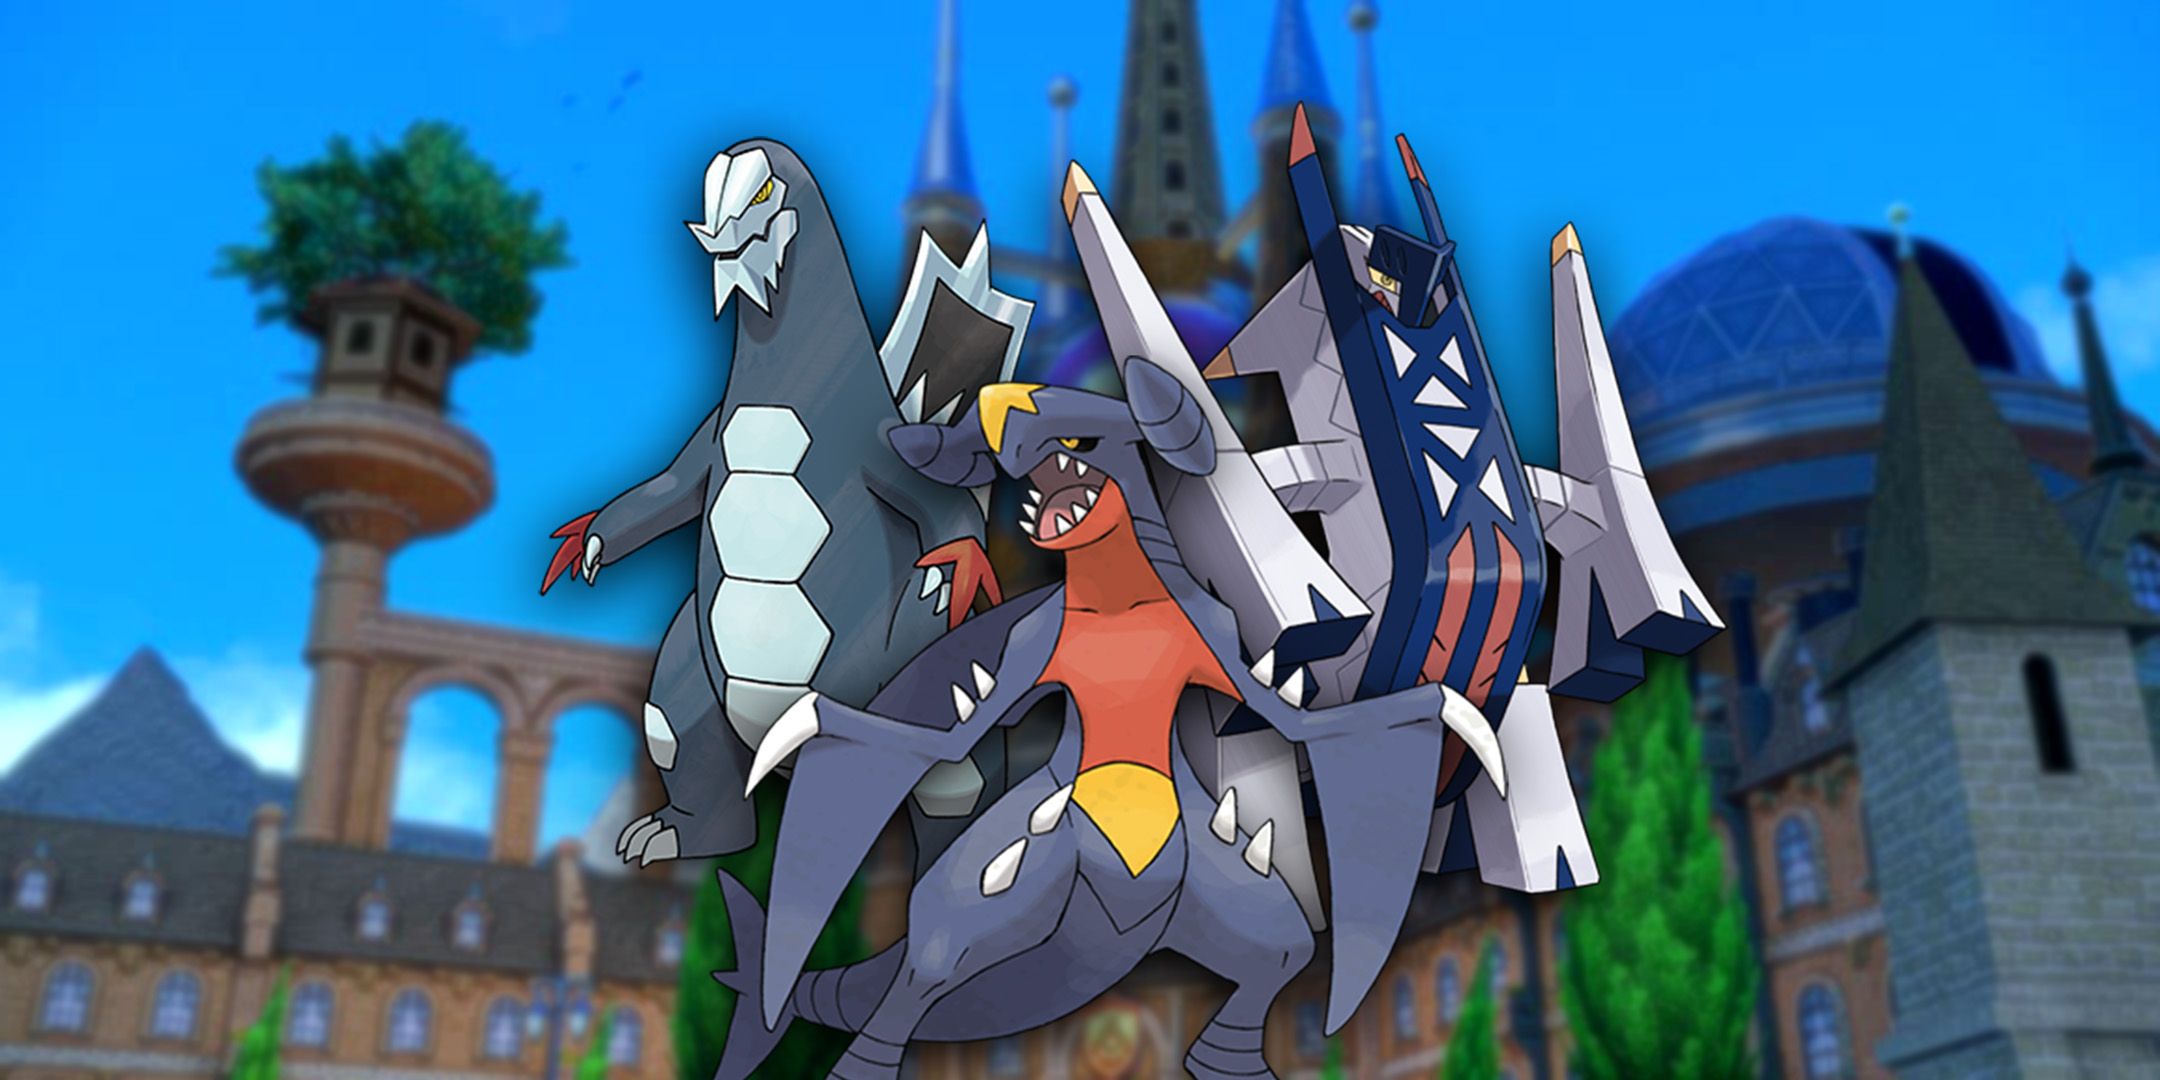 Garchomp, Baxcalibur, and Archaludon in the courtyard of Paldea Pokemon Academy